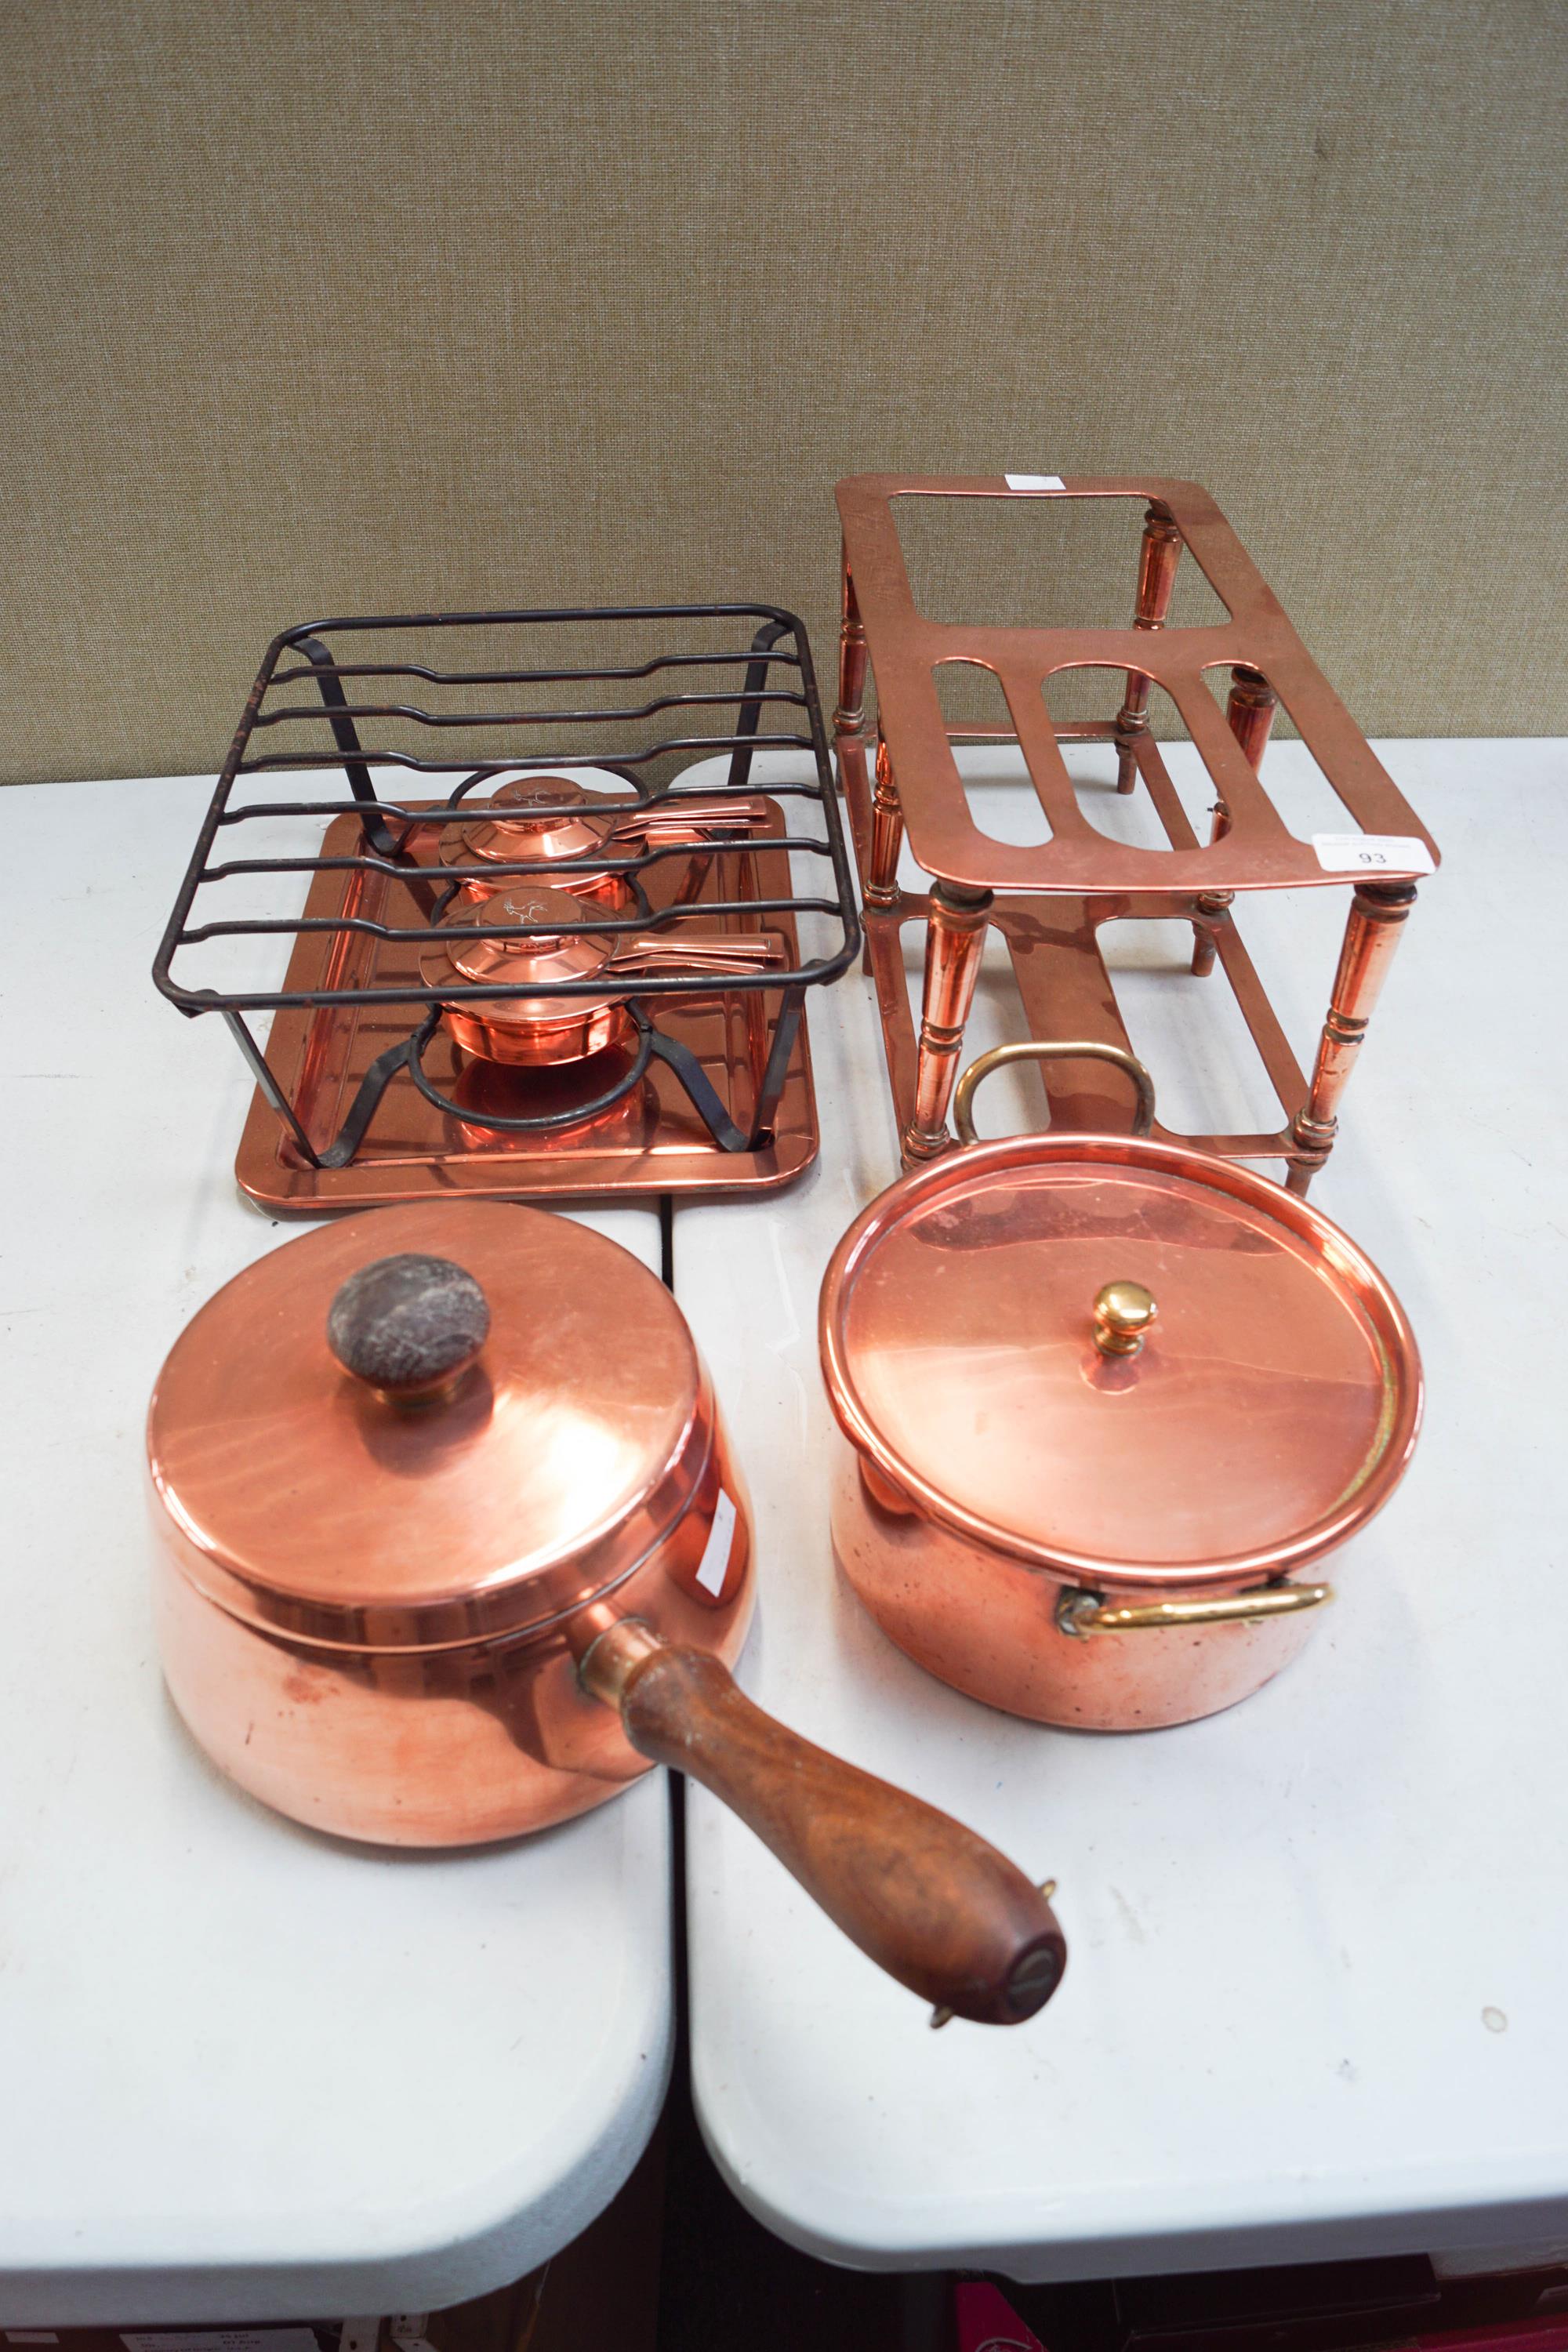 A collection of copper,